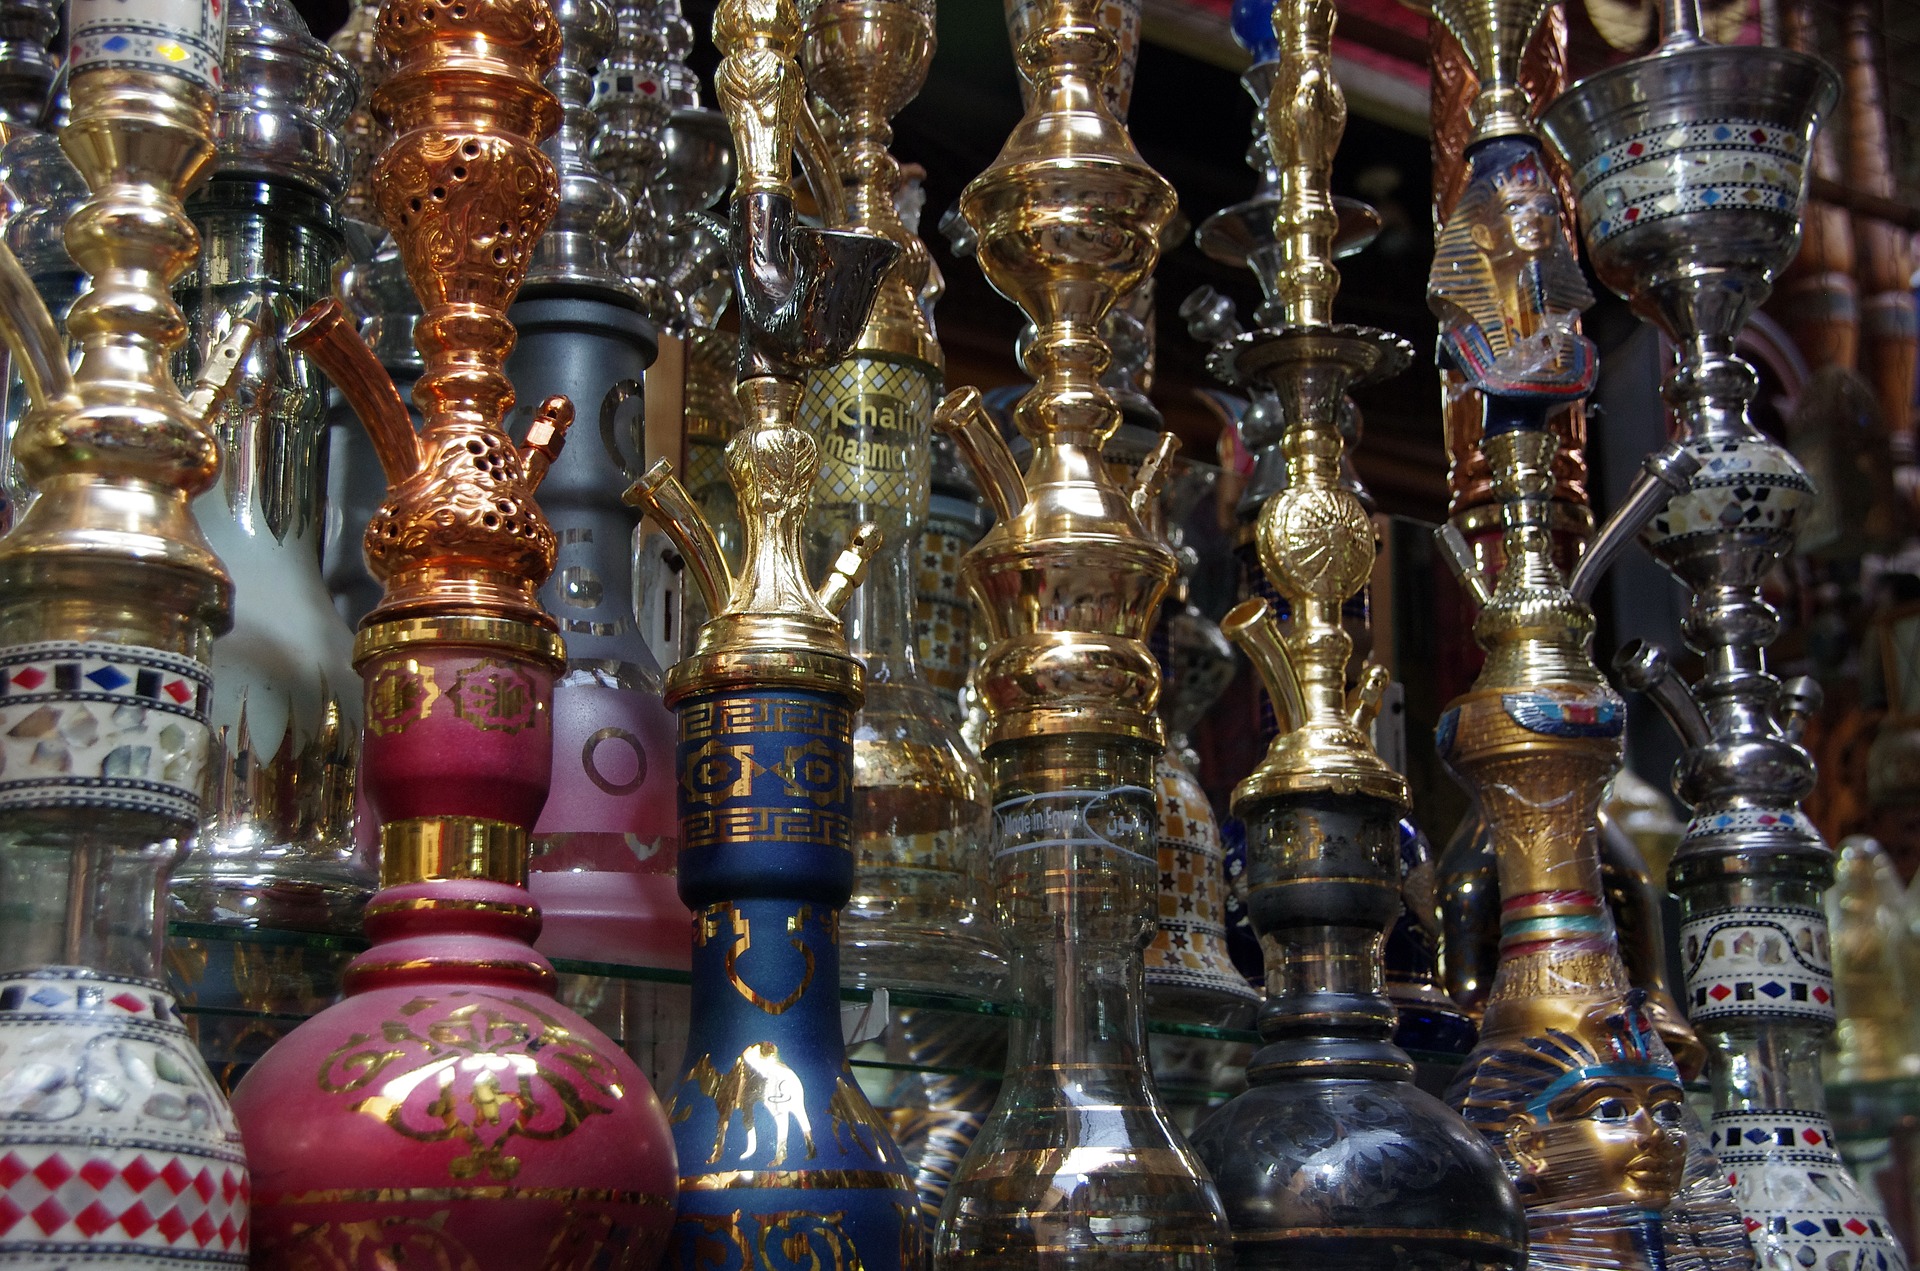 What Makes A Good Shisha? What Are The Different Types Of Shishas?